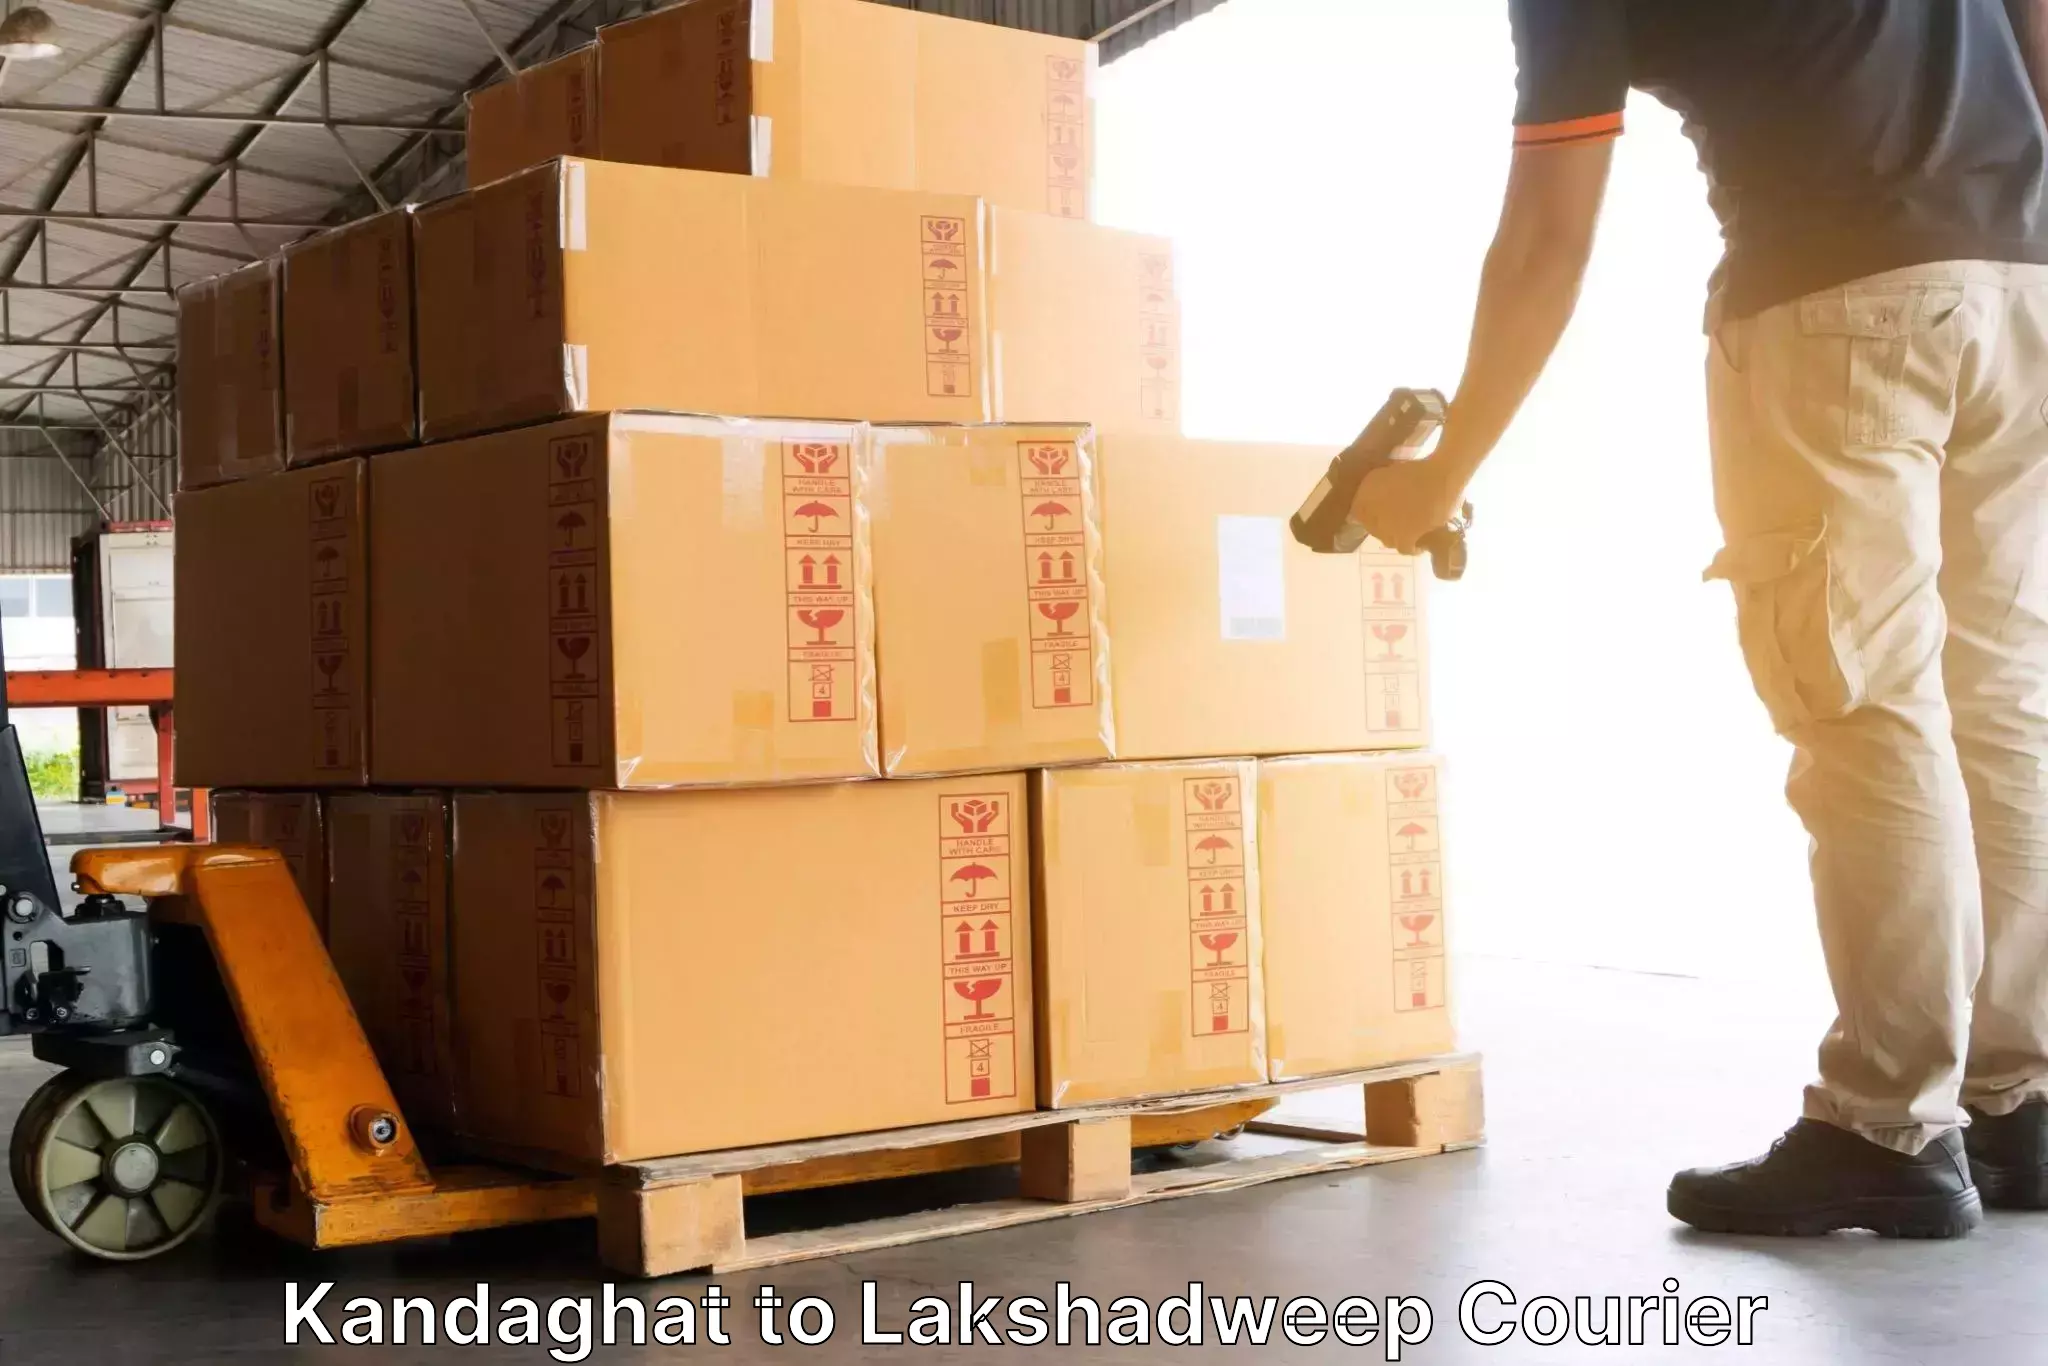 Express delivery capabilities Kandaghat to Lakshadweep